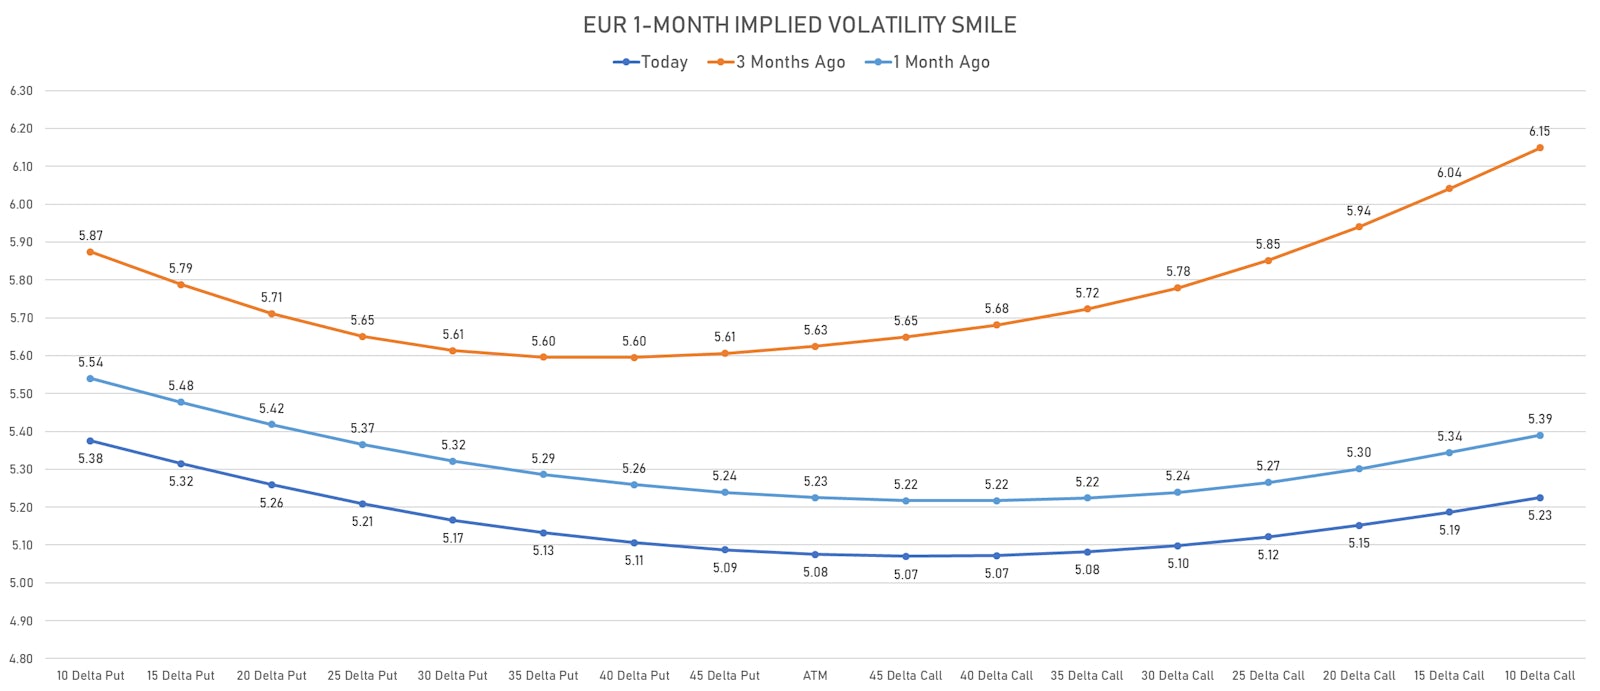 EUR/USD 1-Month Implied Volatility Smile Still Slightly Skewed To The Downside | Sources: ϕpost, Refinitiv data